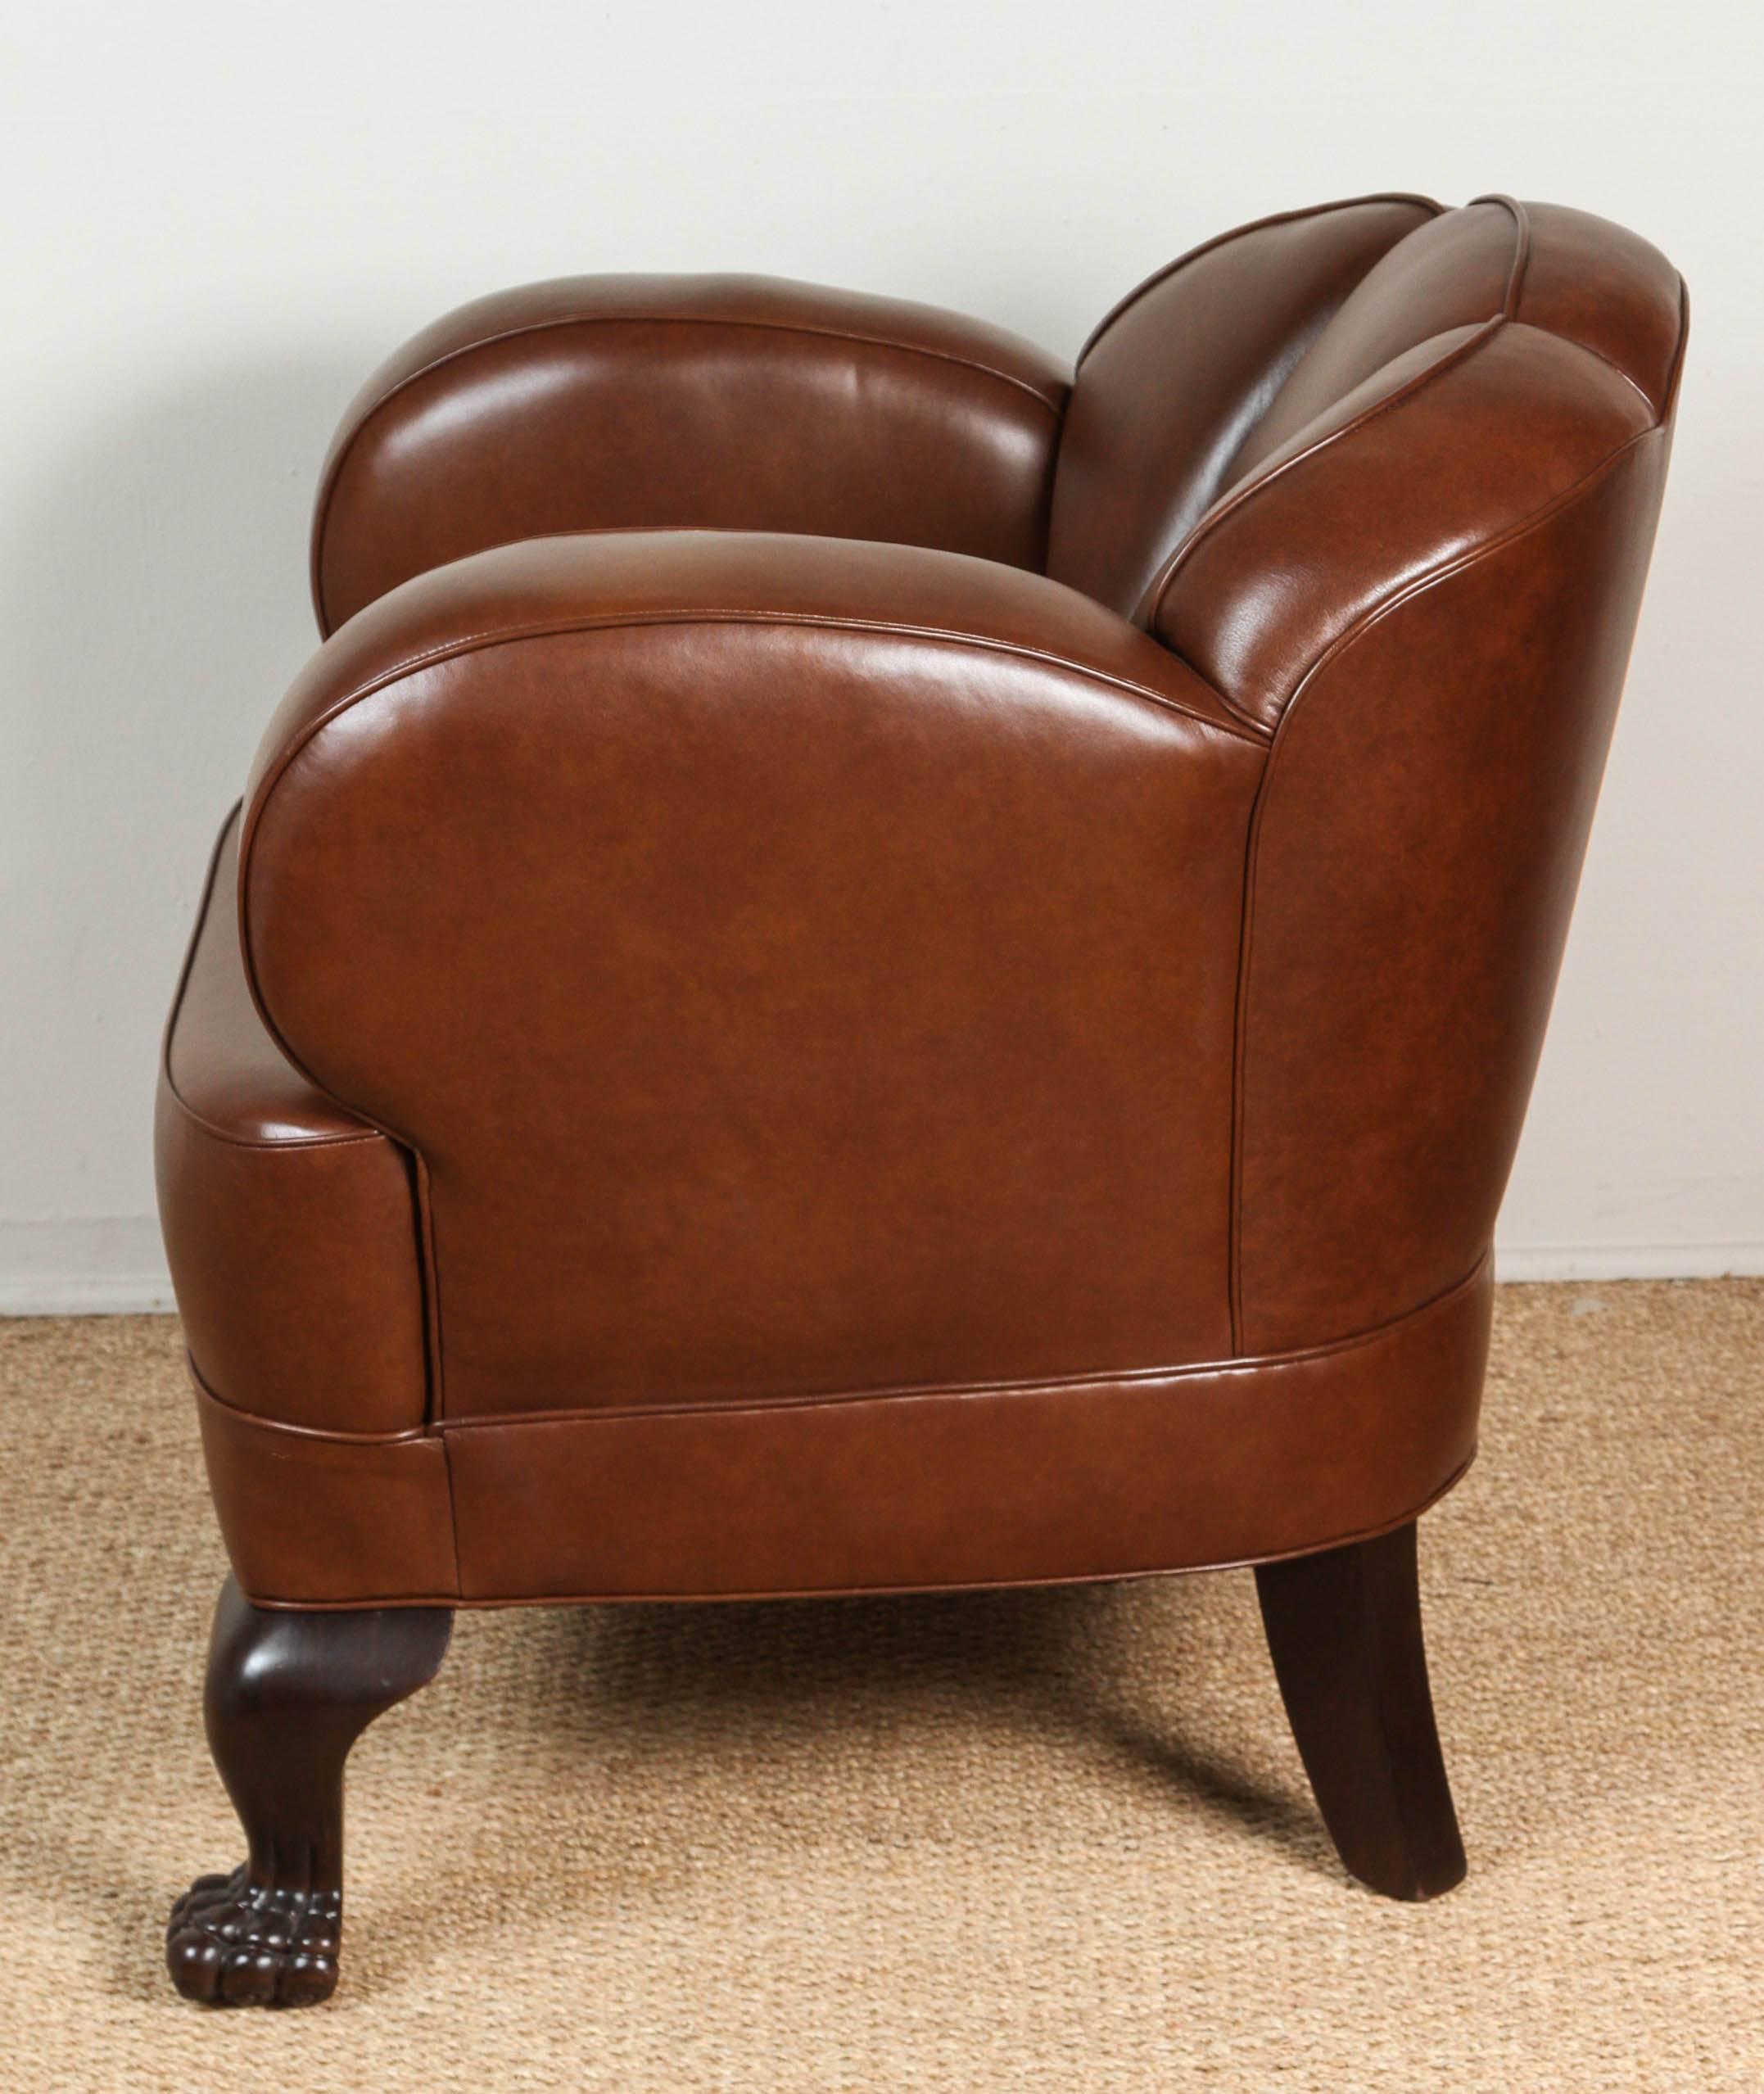  Workshop Leather Chairs In Excellent Condition For Sale In Los Angeles, CA